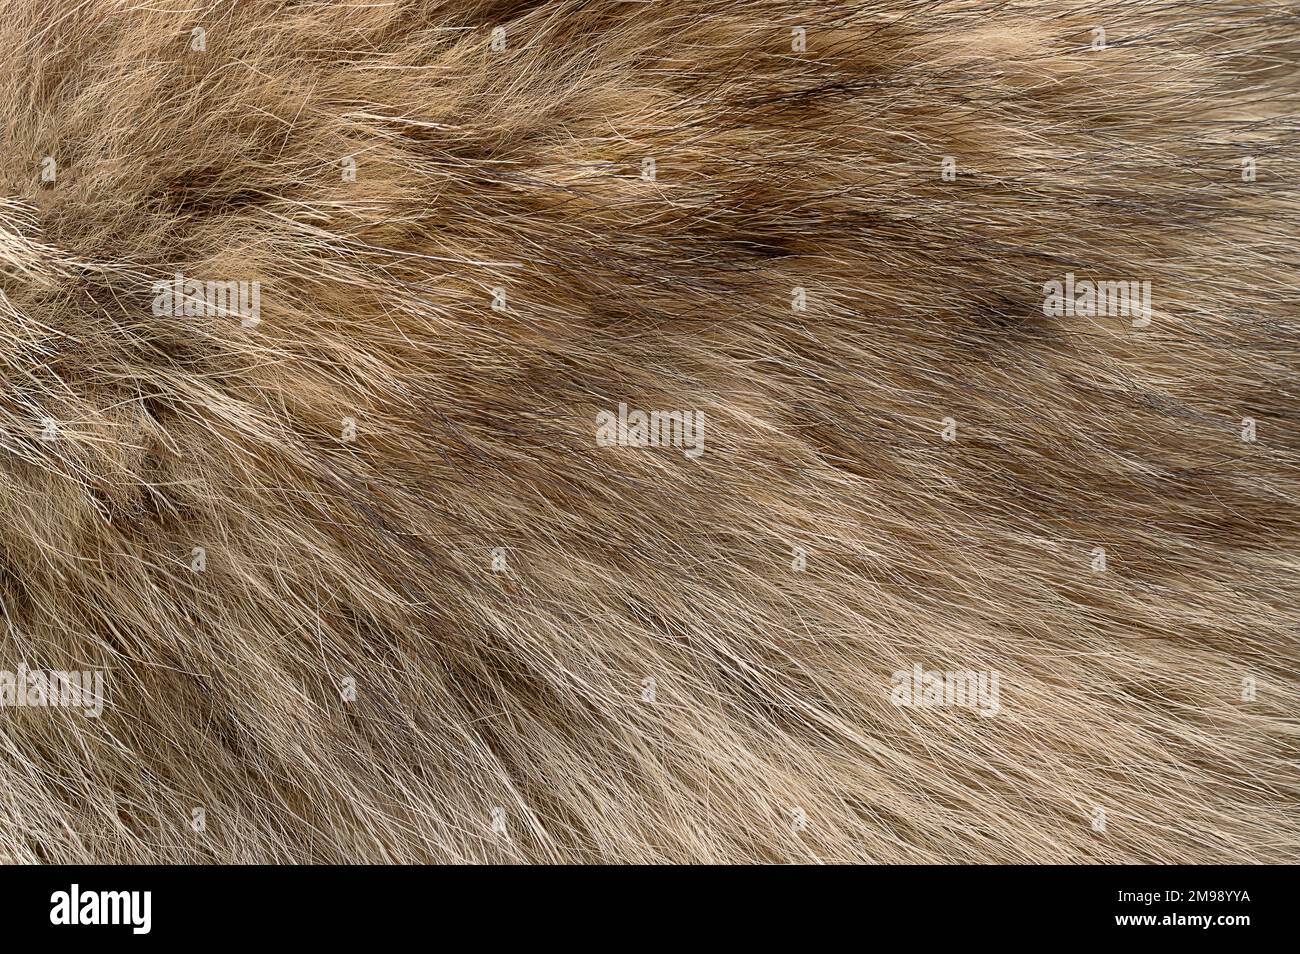 Real grey wolf fur, surface. Wolf pelt with silky, fluffy and bushy fur fibers, primarily used for scarfs. Thick growth of hair covering gray wolves. Stock Photo